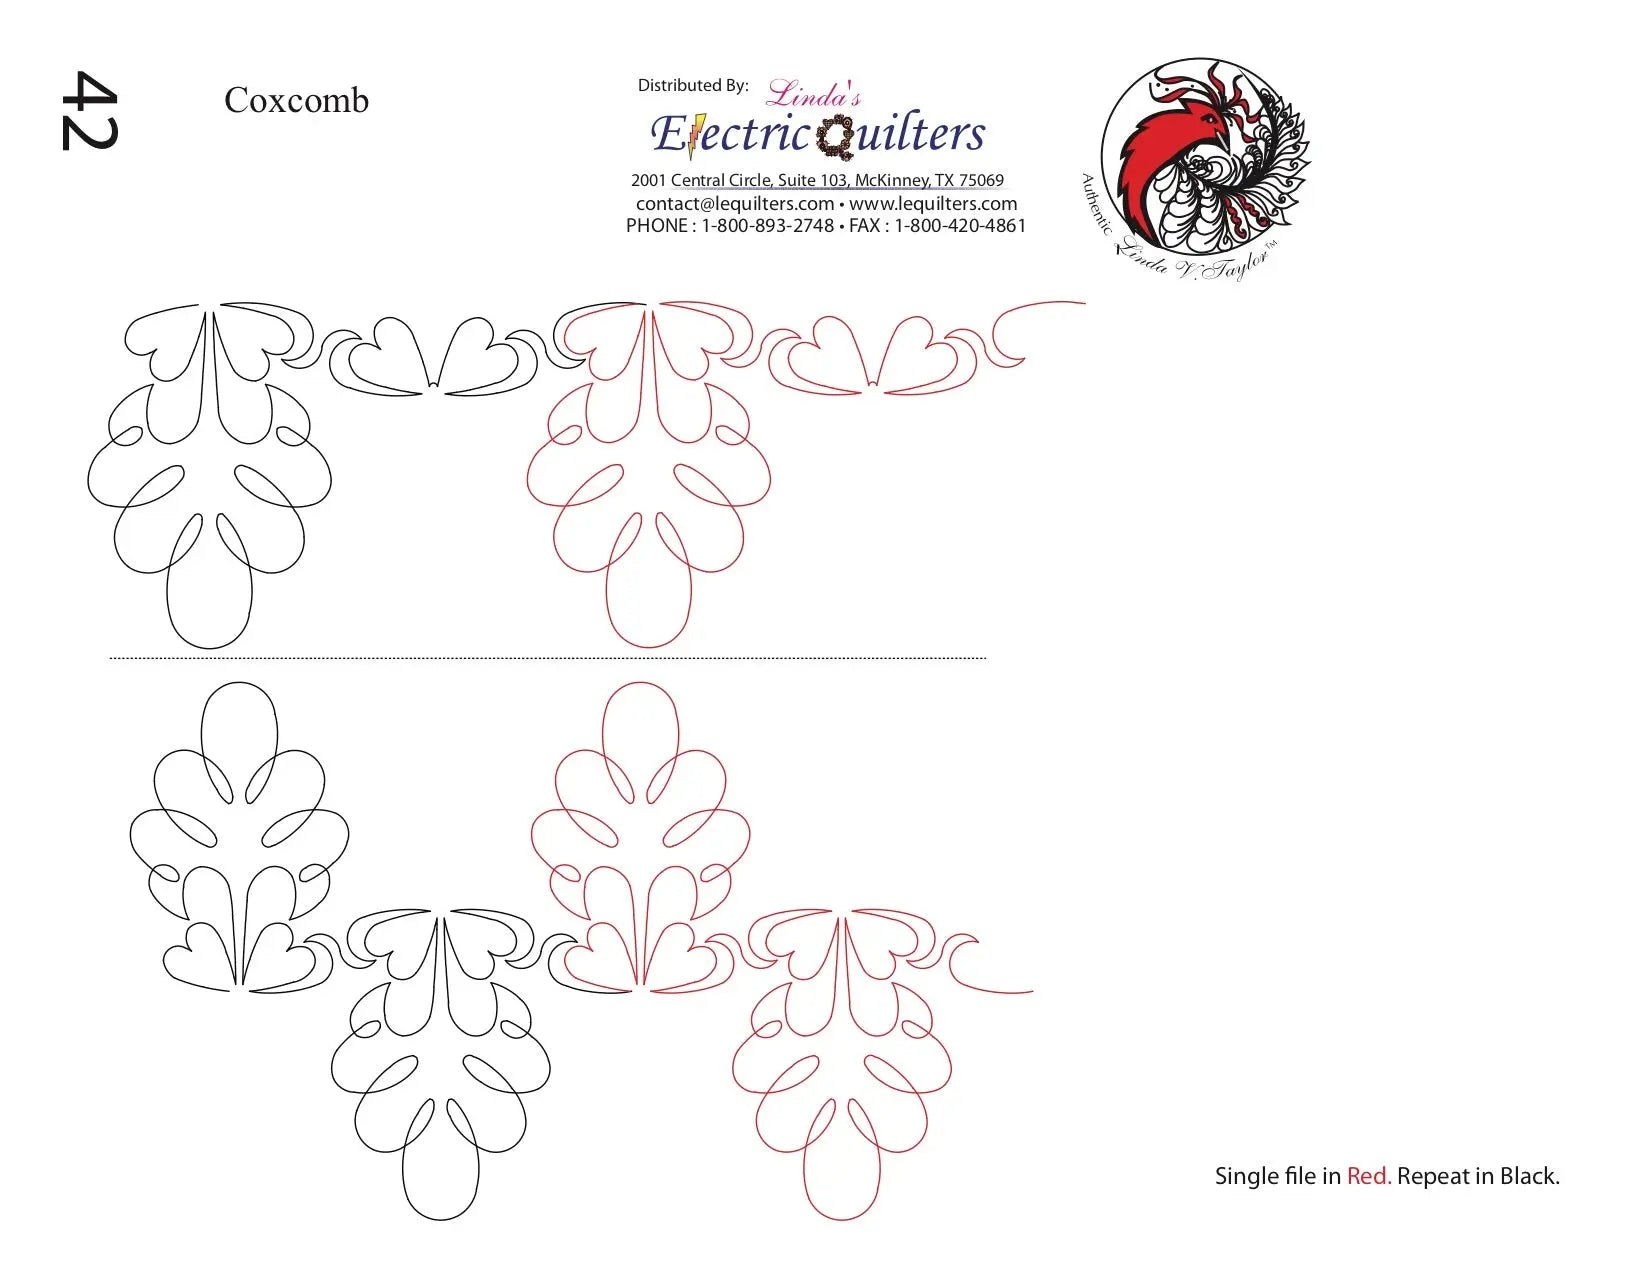 042 Coxcomb Pantograph by Linda V. Taylor - Linda's Electric Quilters